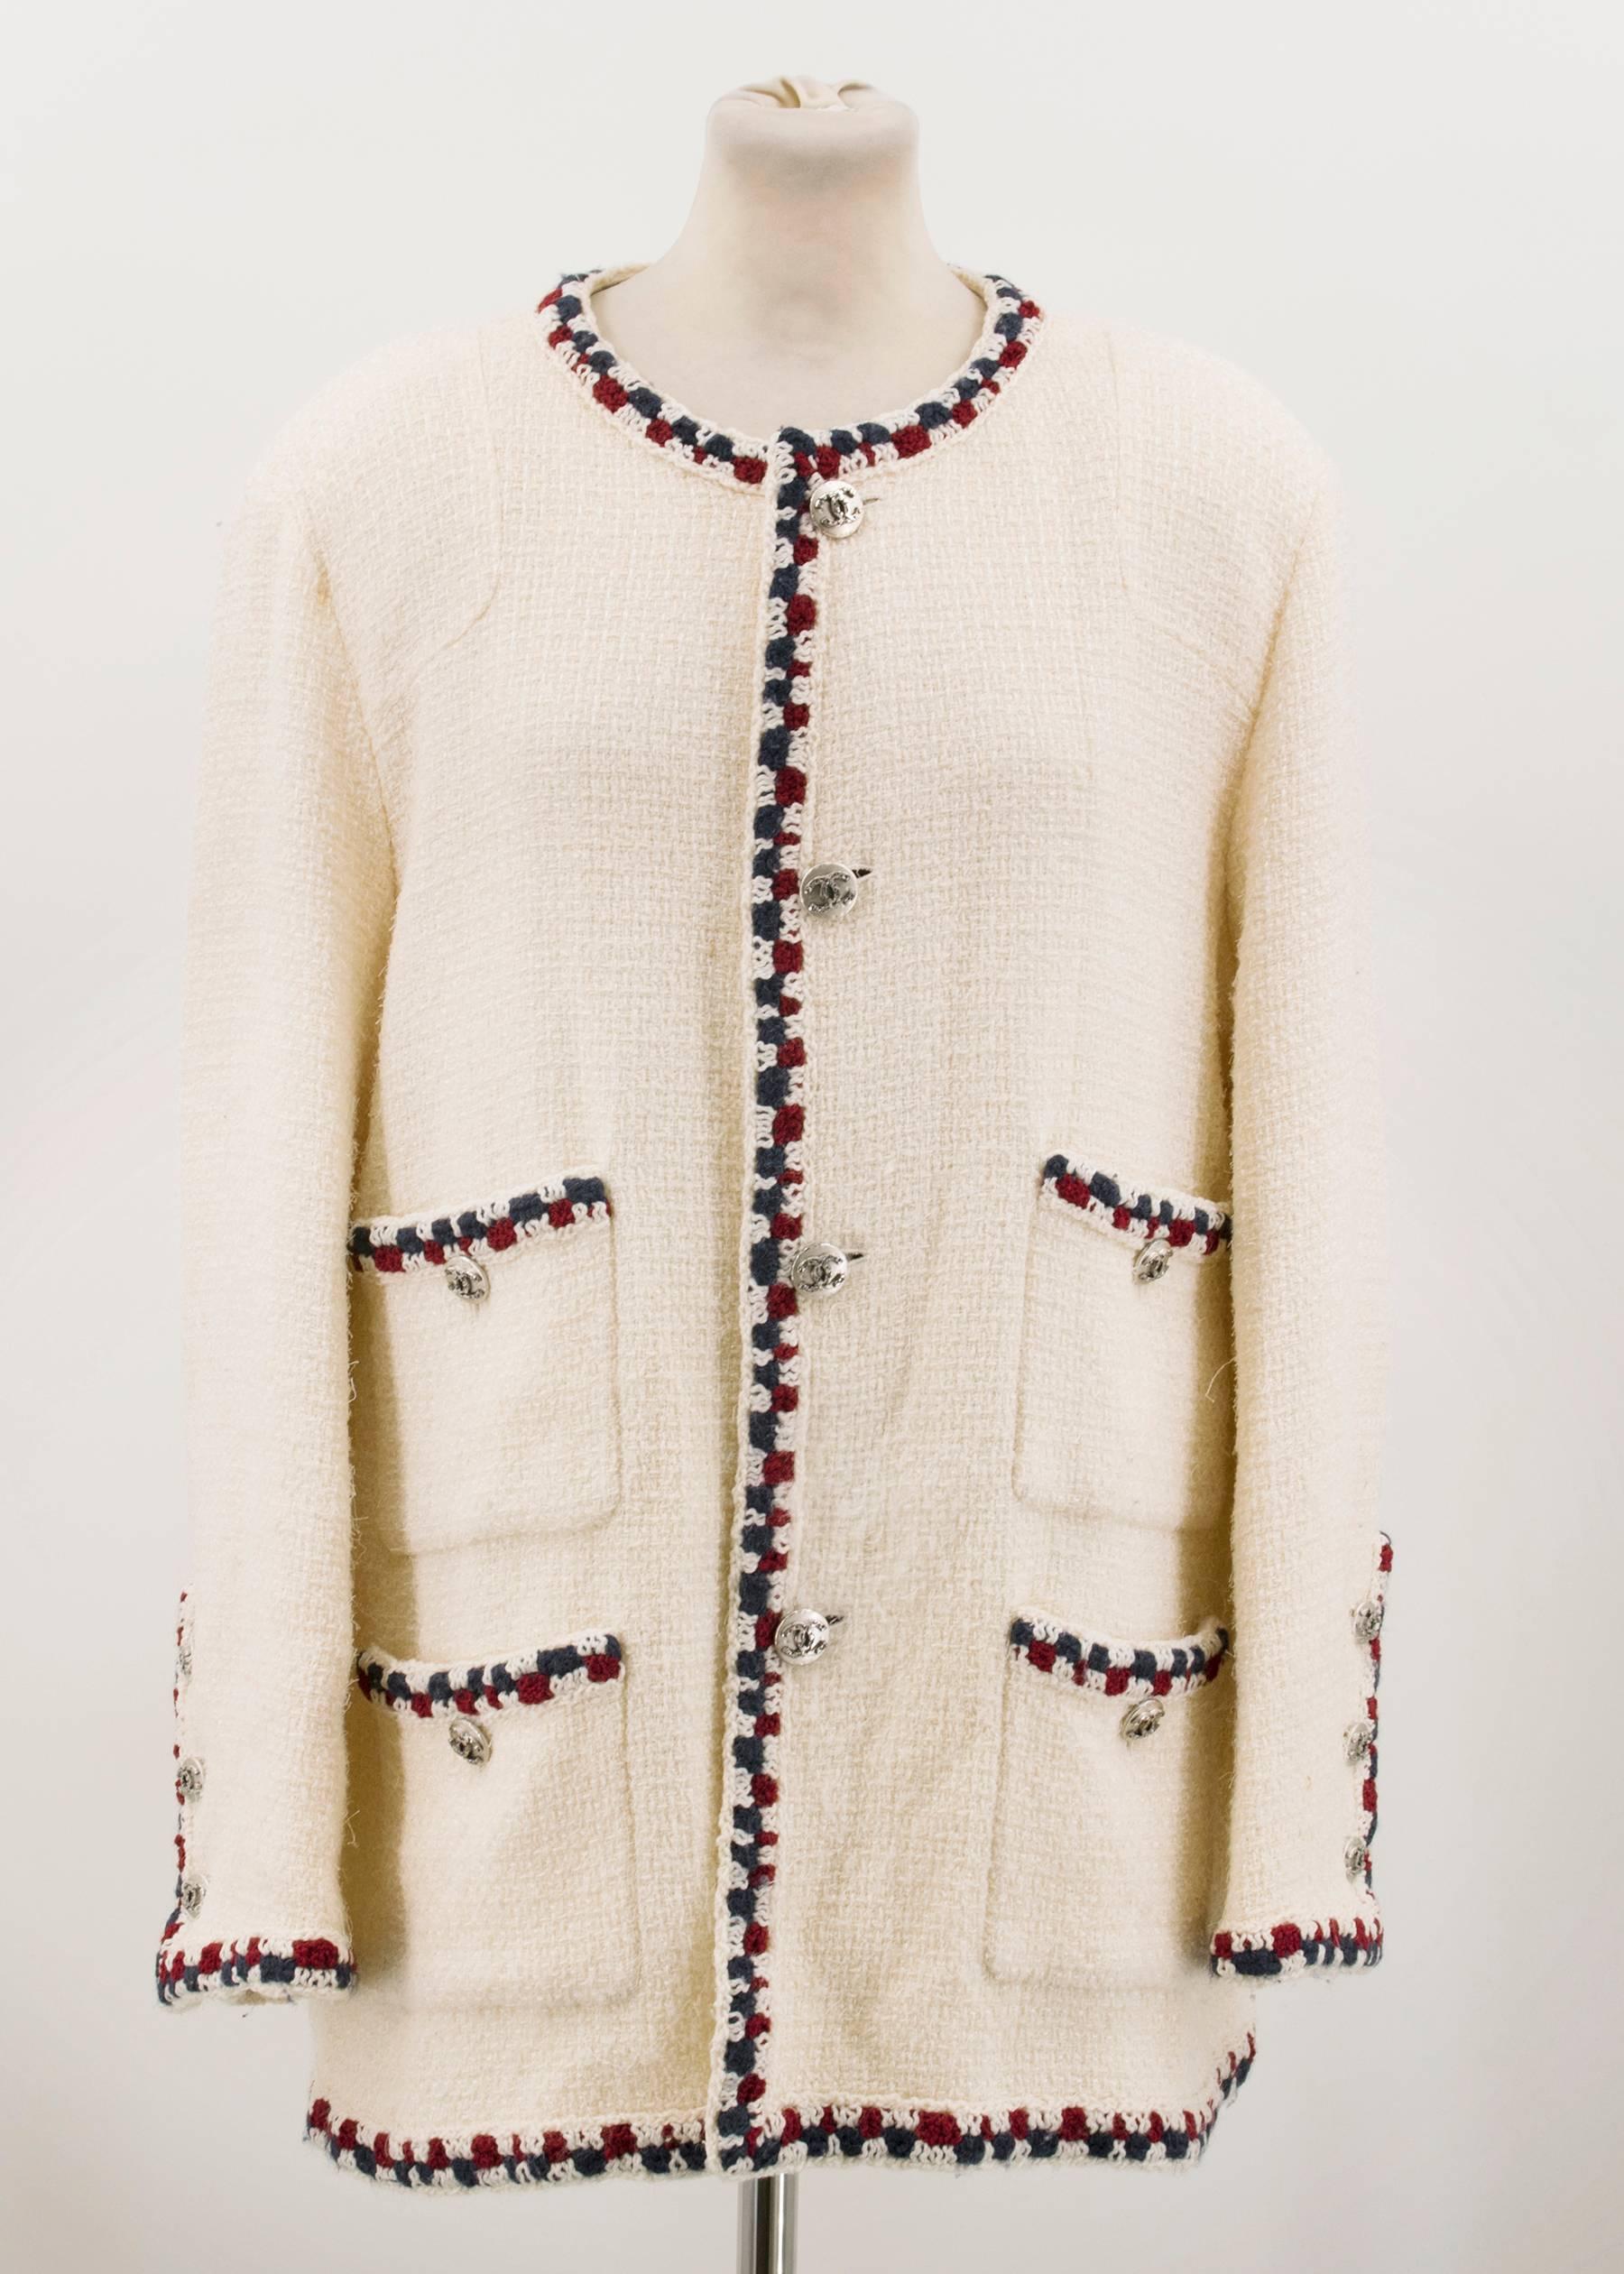 Chanel wool blend cream tweed jacket with blue, cream and wine details on collar, bust, pockets and cuffs. Silver metal 'CC' buttons. 4 front pockets. Fully lined in silk. Padded shoulders. 

Measurements	
Approx: Length - 78cm Sleeve - 44cm Bust -